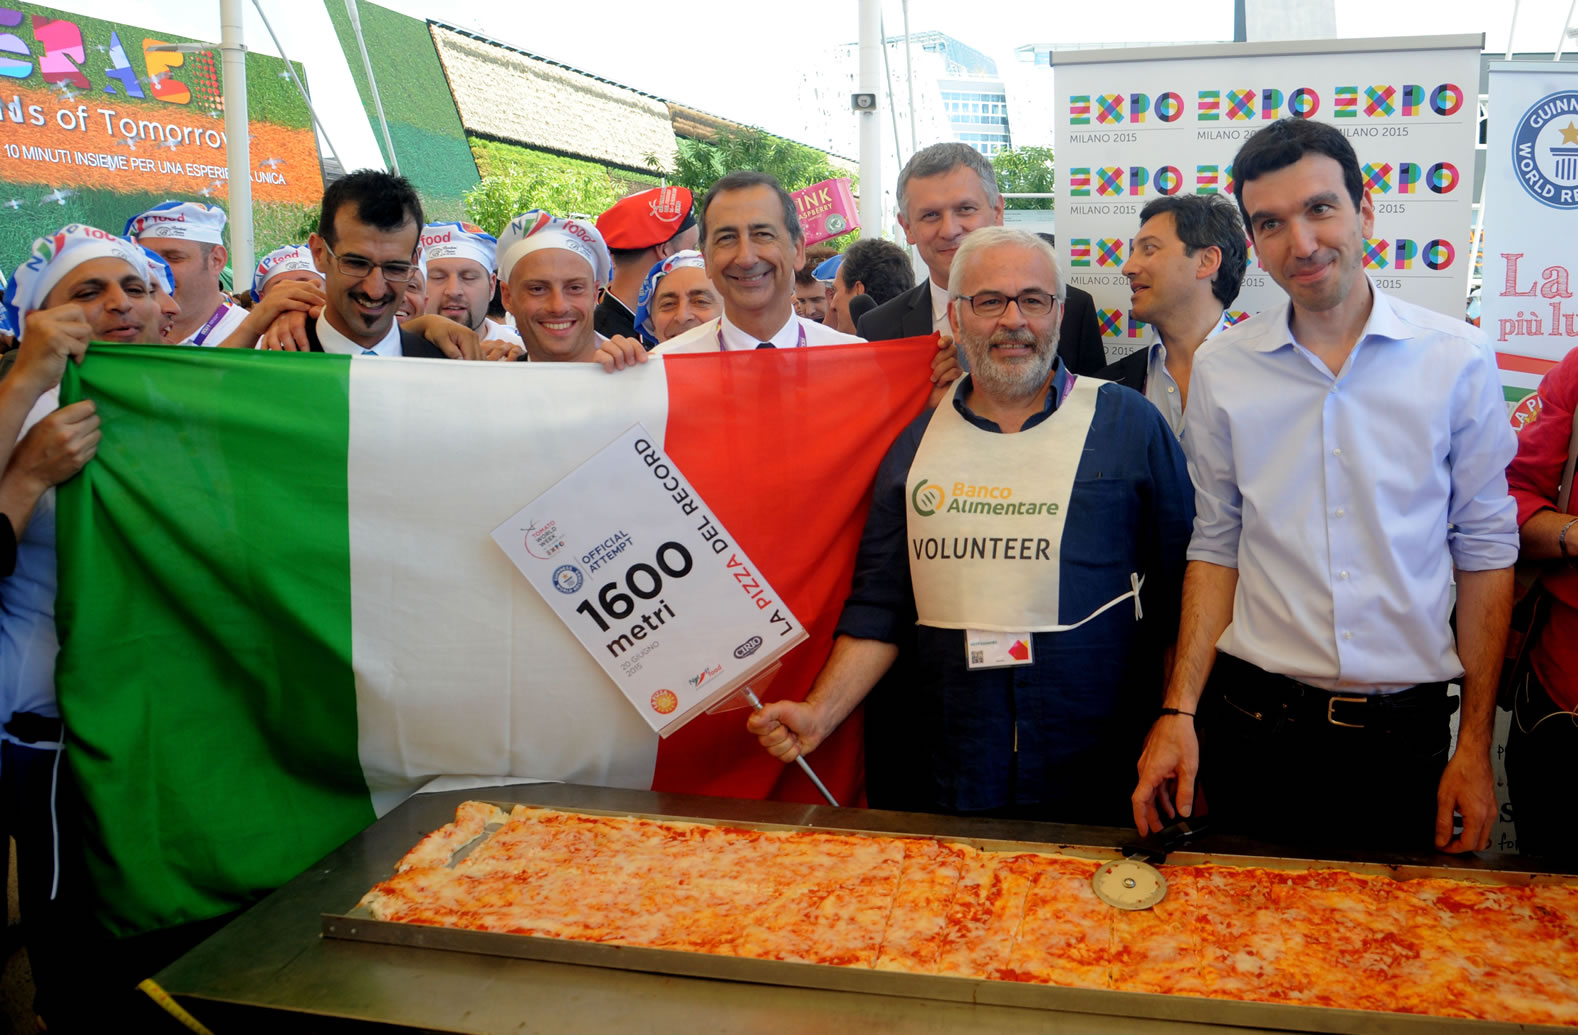 Longest Pizza: Milan Expo breaks Guinness World Records record (VIDEO)